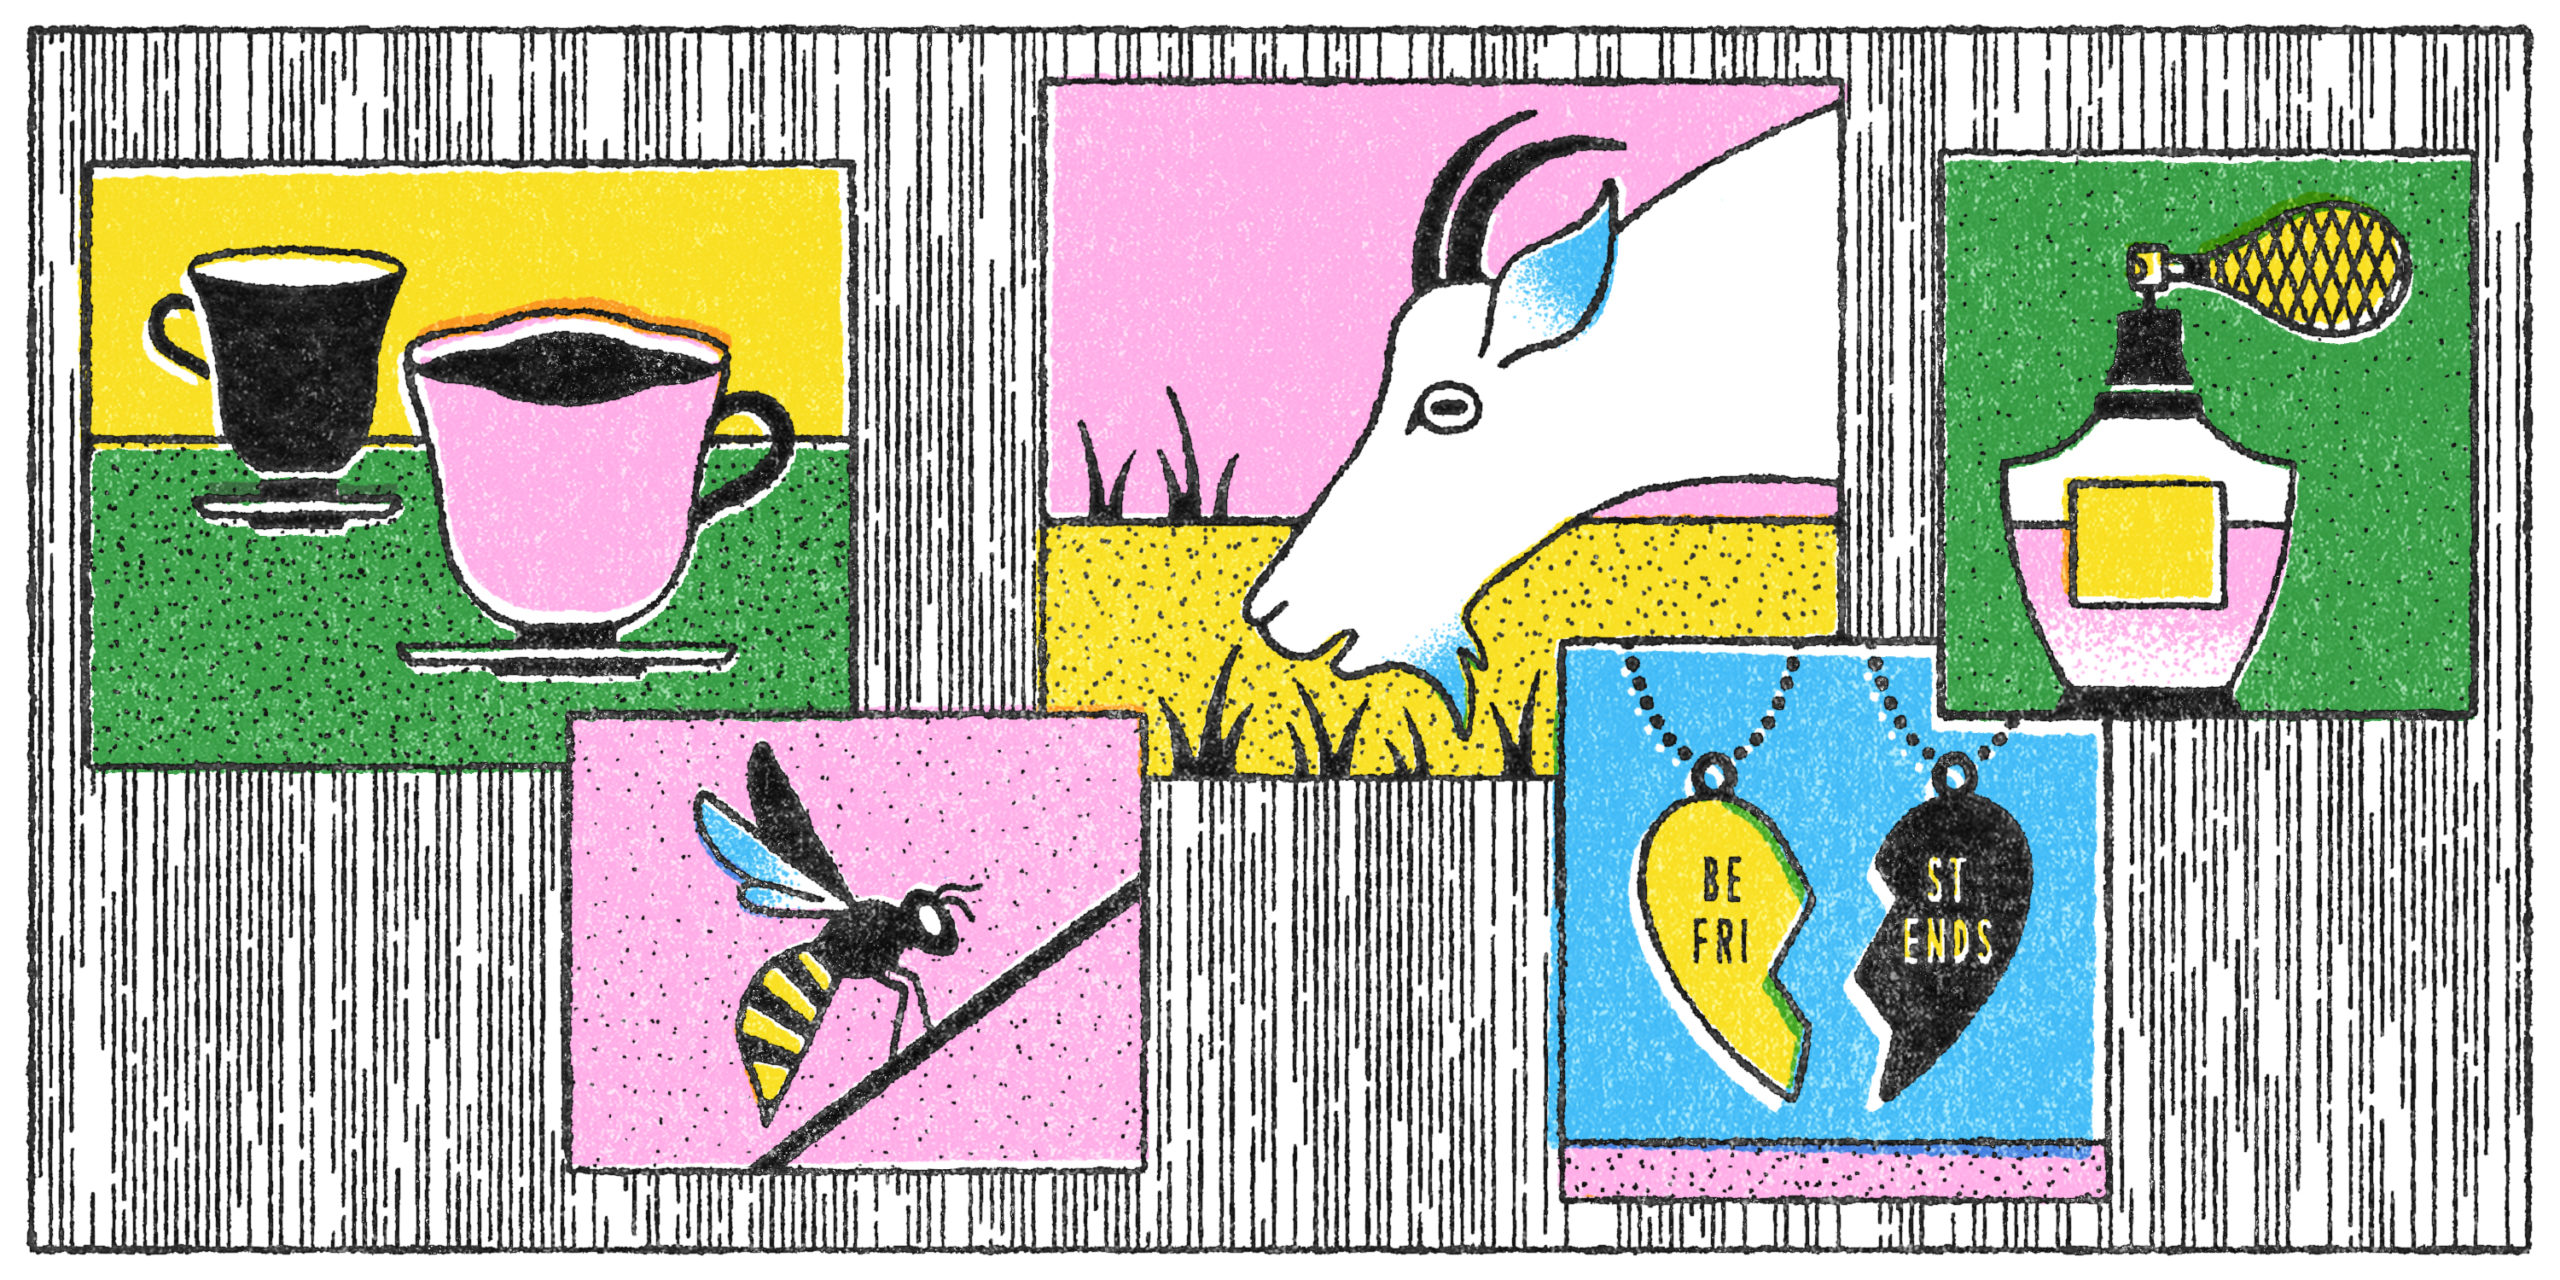 A scattered grid of illustrations, including two cups of tea, a bee, a goat eating grass, BFF necklaces, and a perfume bottle.